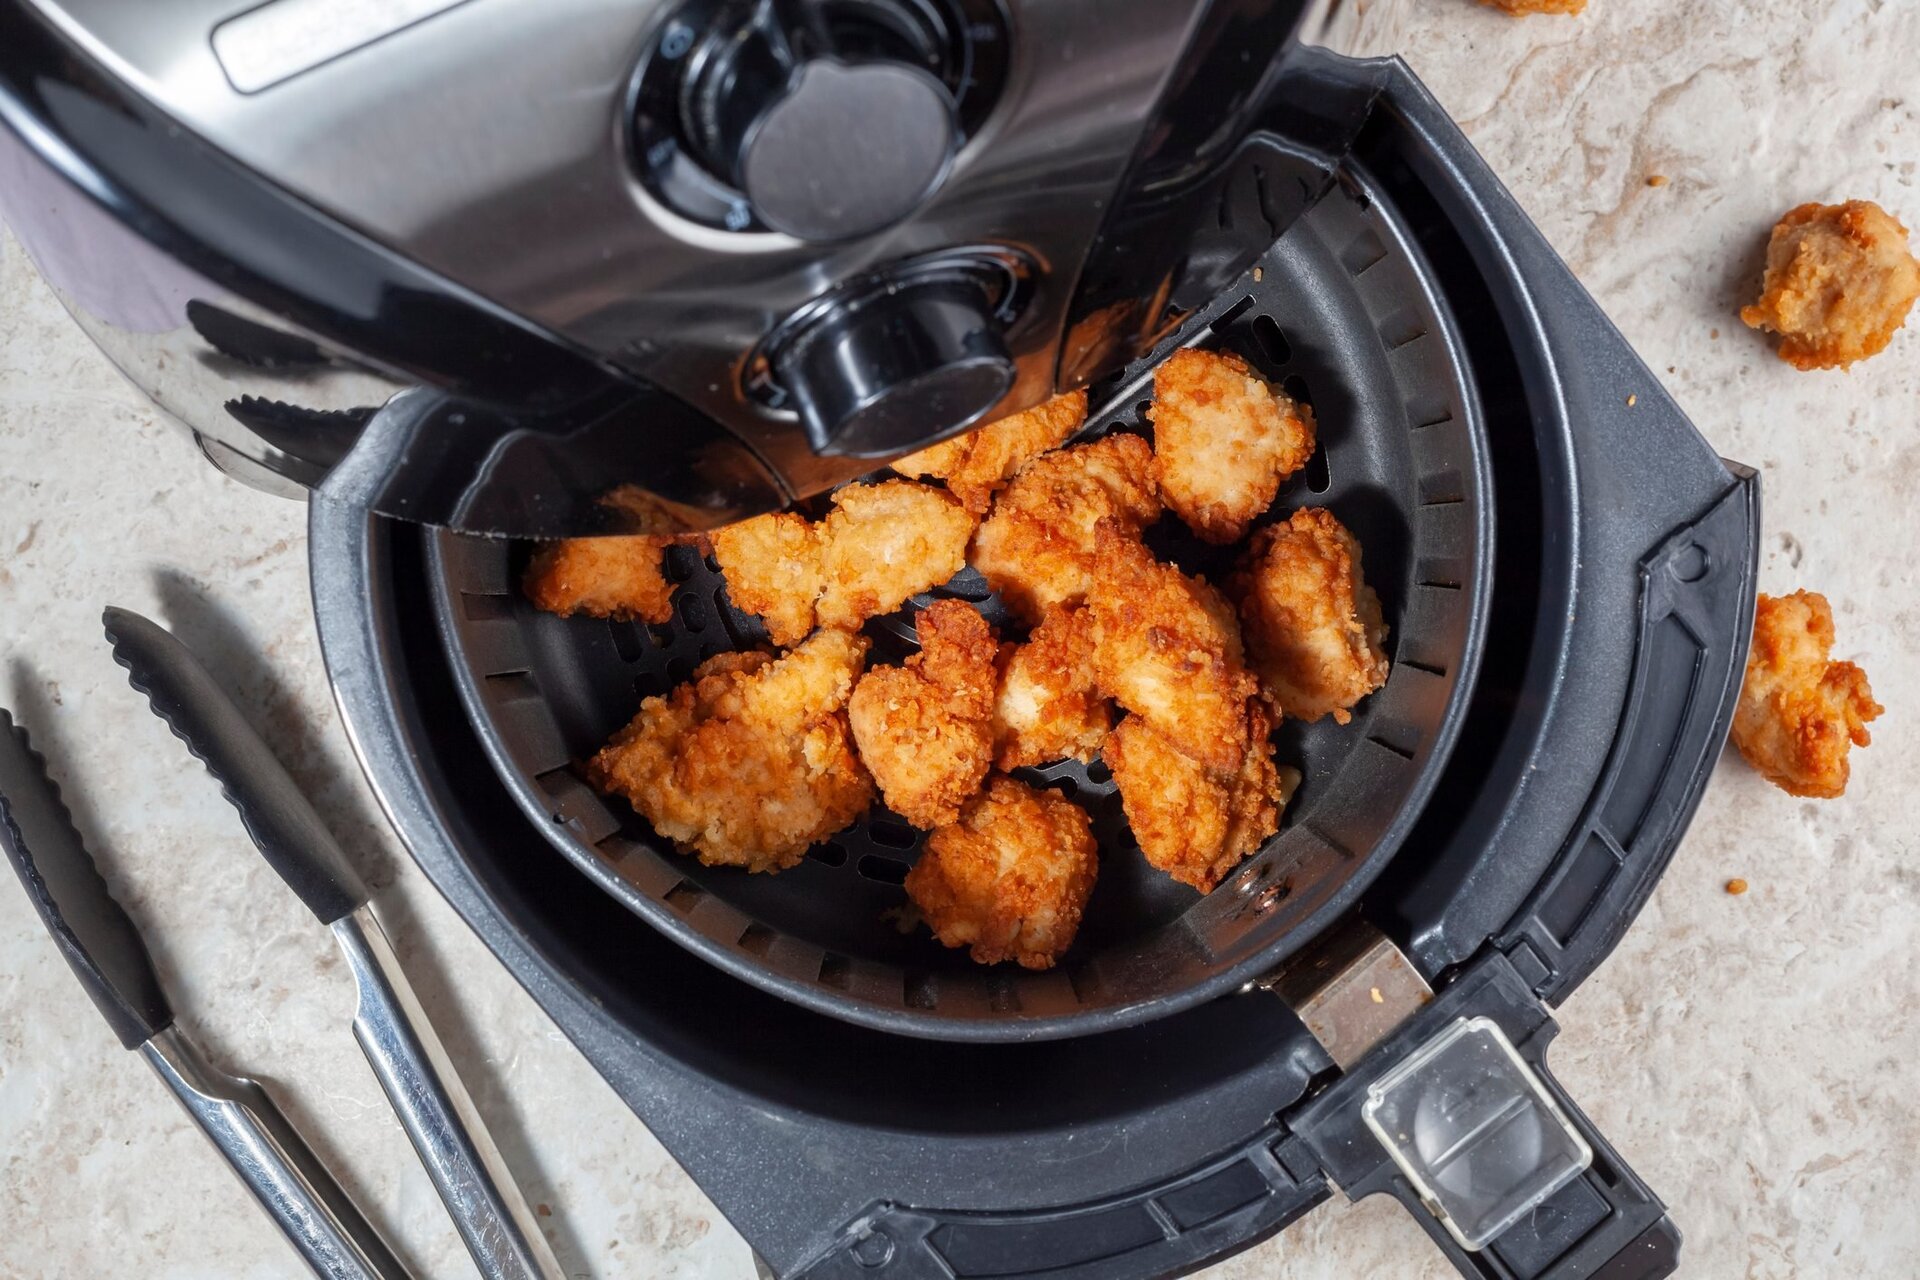 How To Reheat Chicken Nuggets In Air Fryer